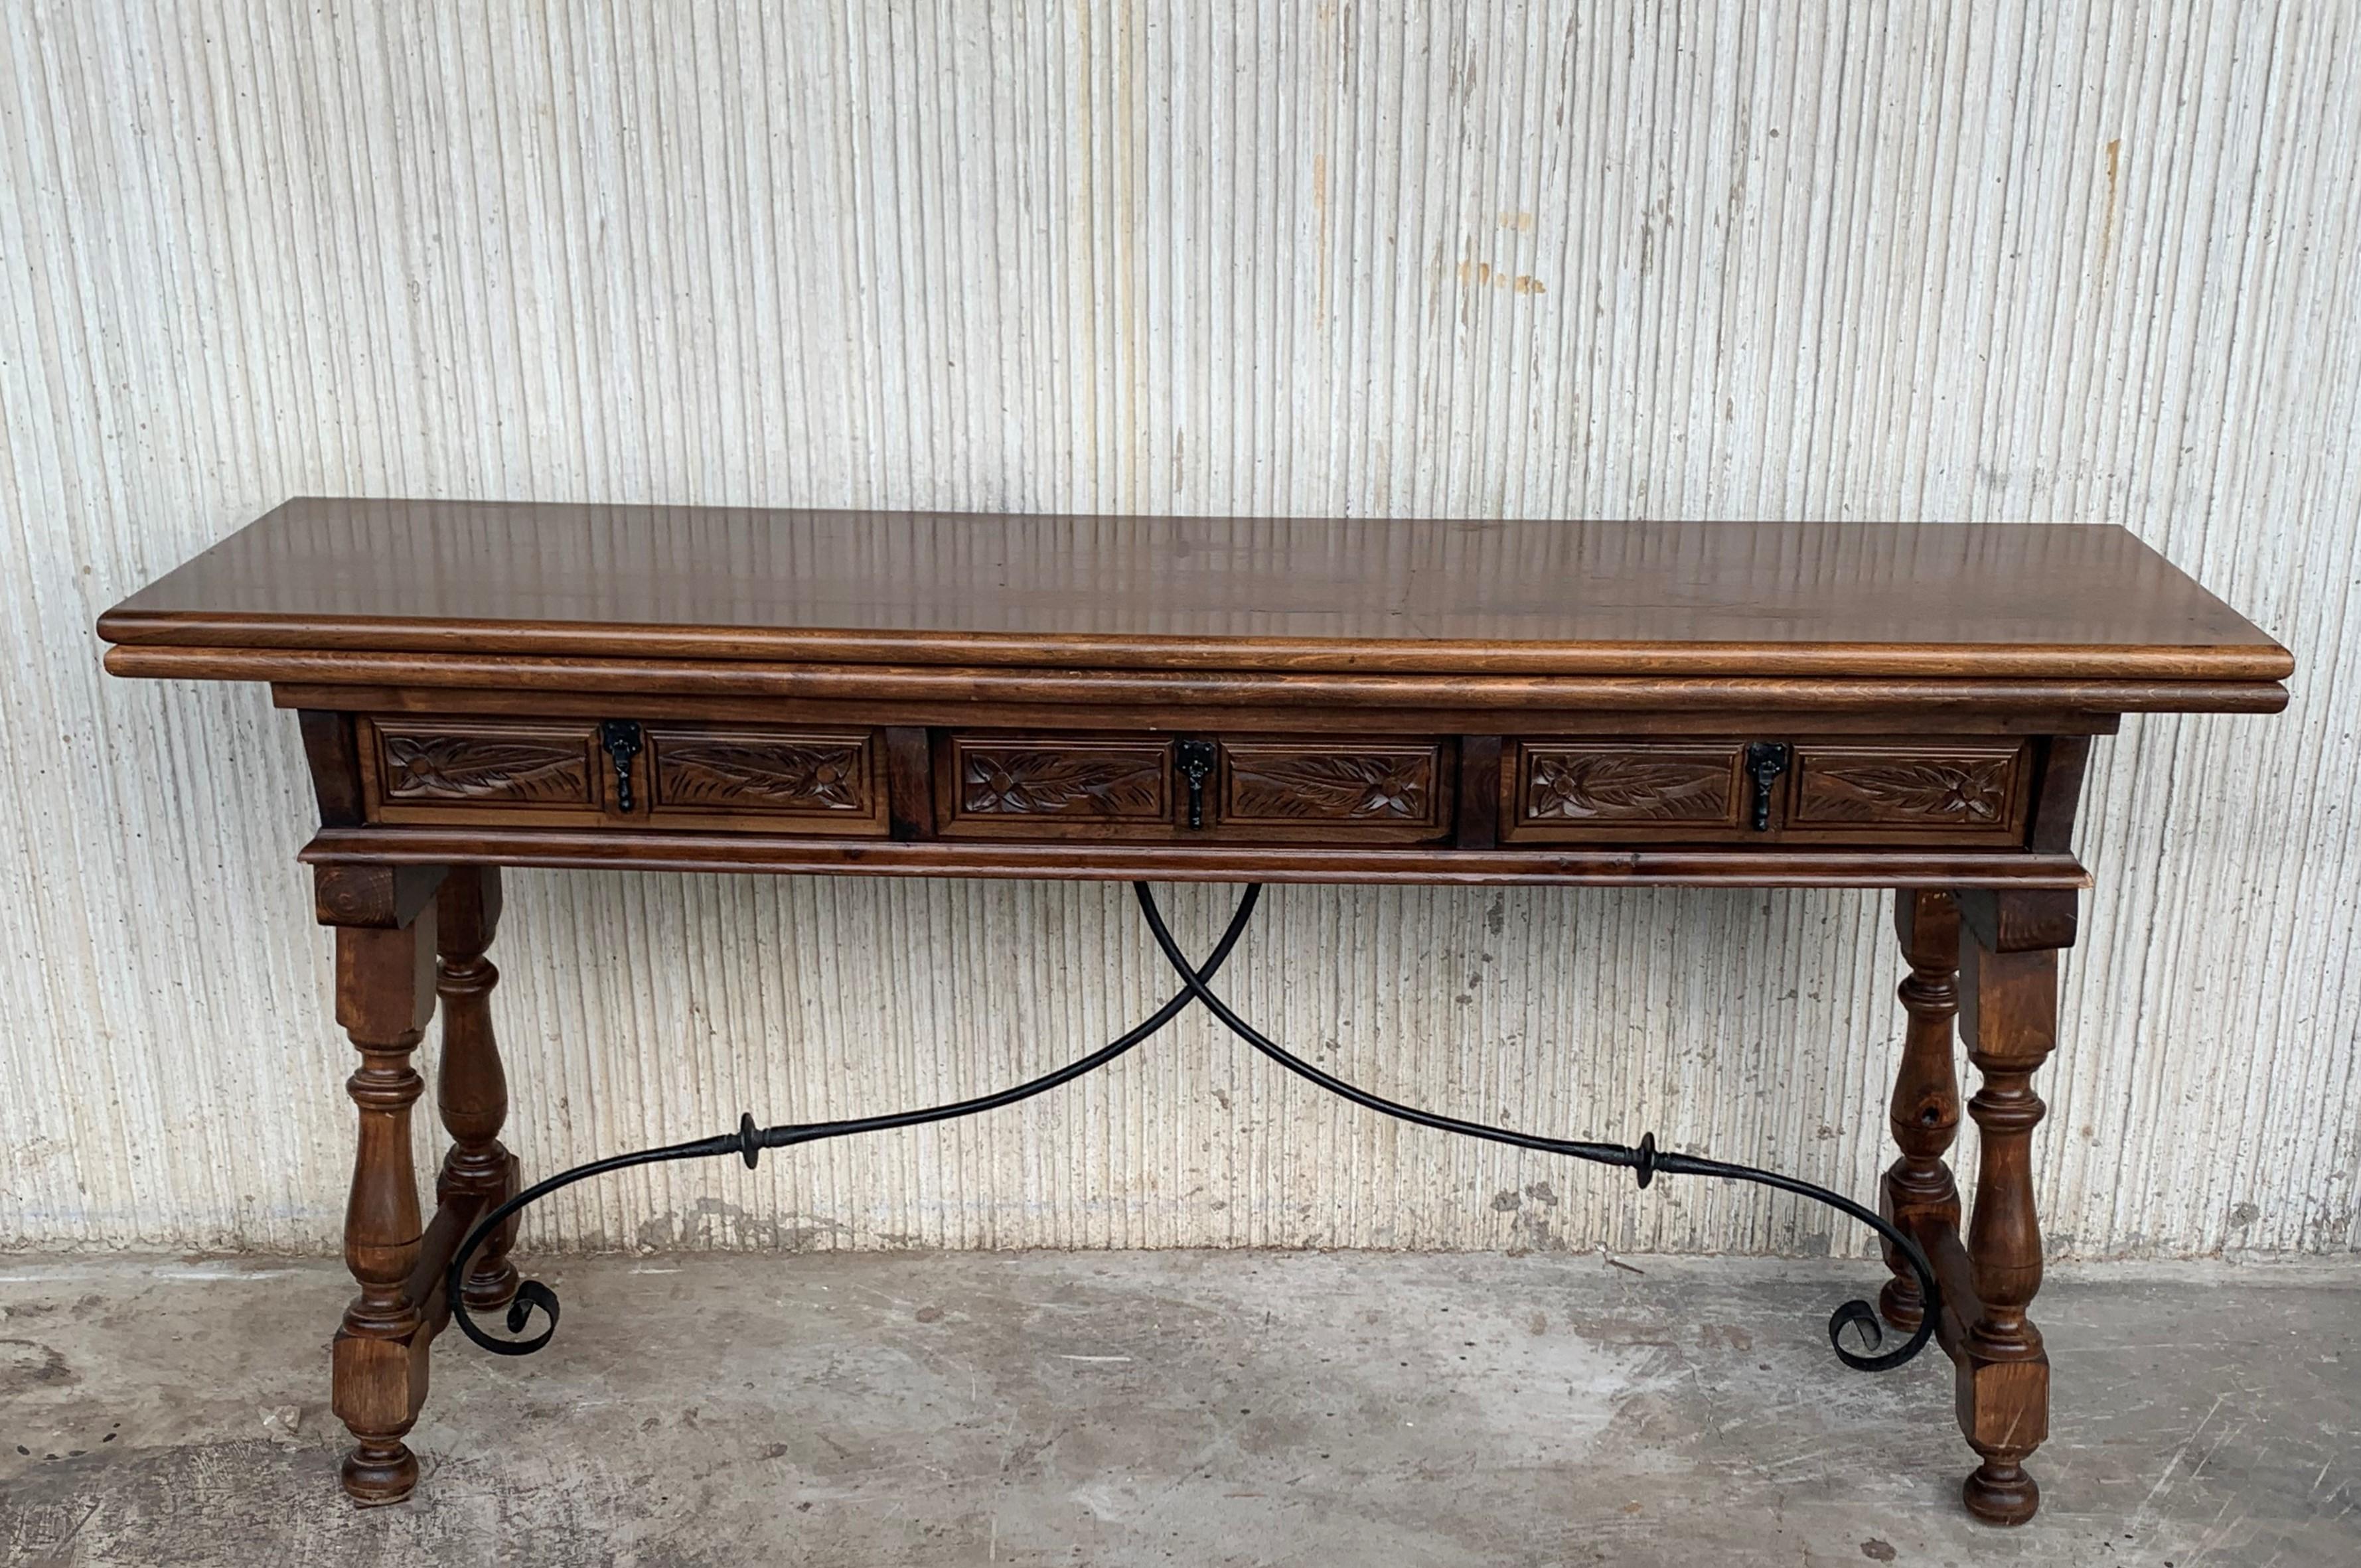 20th century Spanish console fold out farm table with three carved drawers and iron stretcher
Works as both a dining table and console.

Open measurements: 33in x 63in.
  